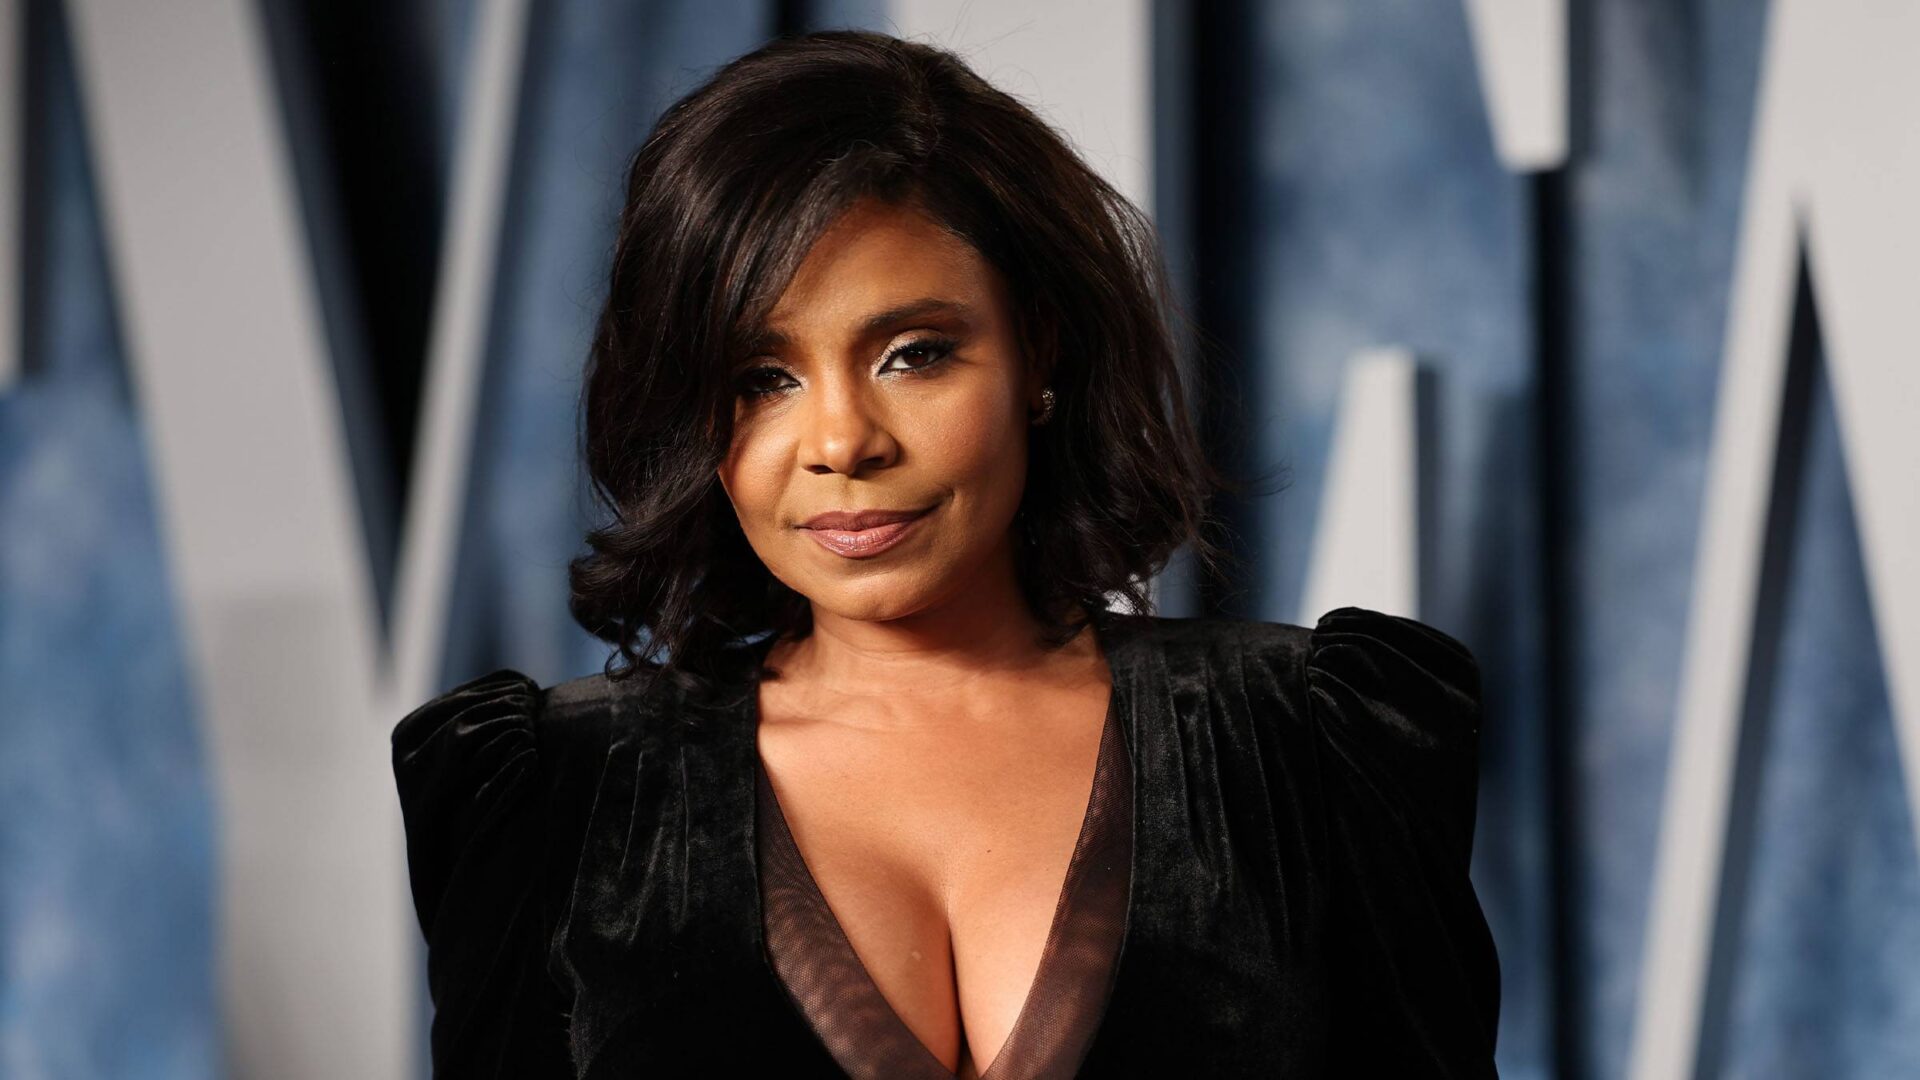 Sanaa Lathan Biography: Age, Net Worth, Height, Instagram, Parents, Spouses, Siblings, Movies, Awards, Wiki